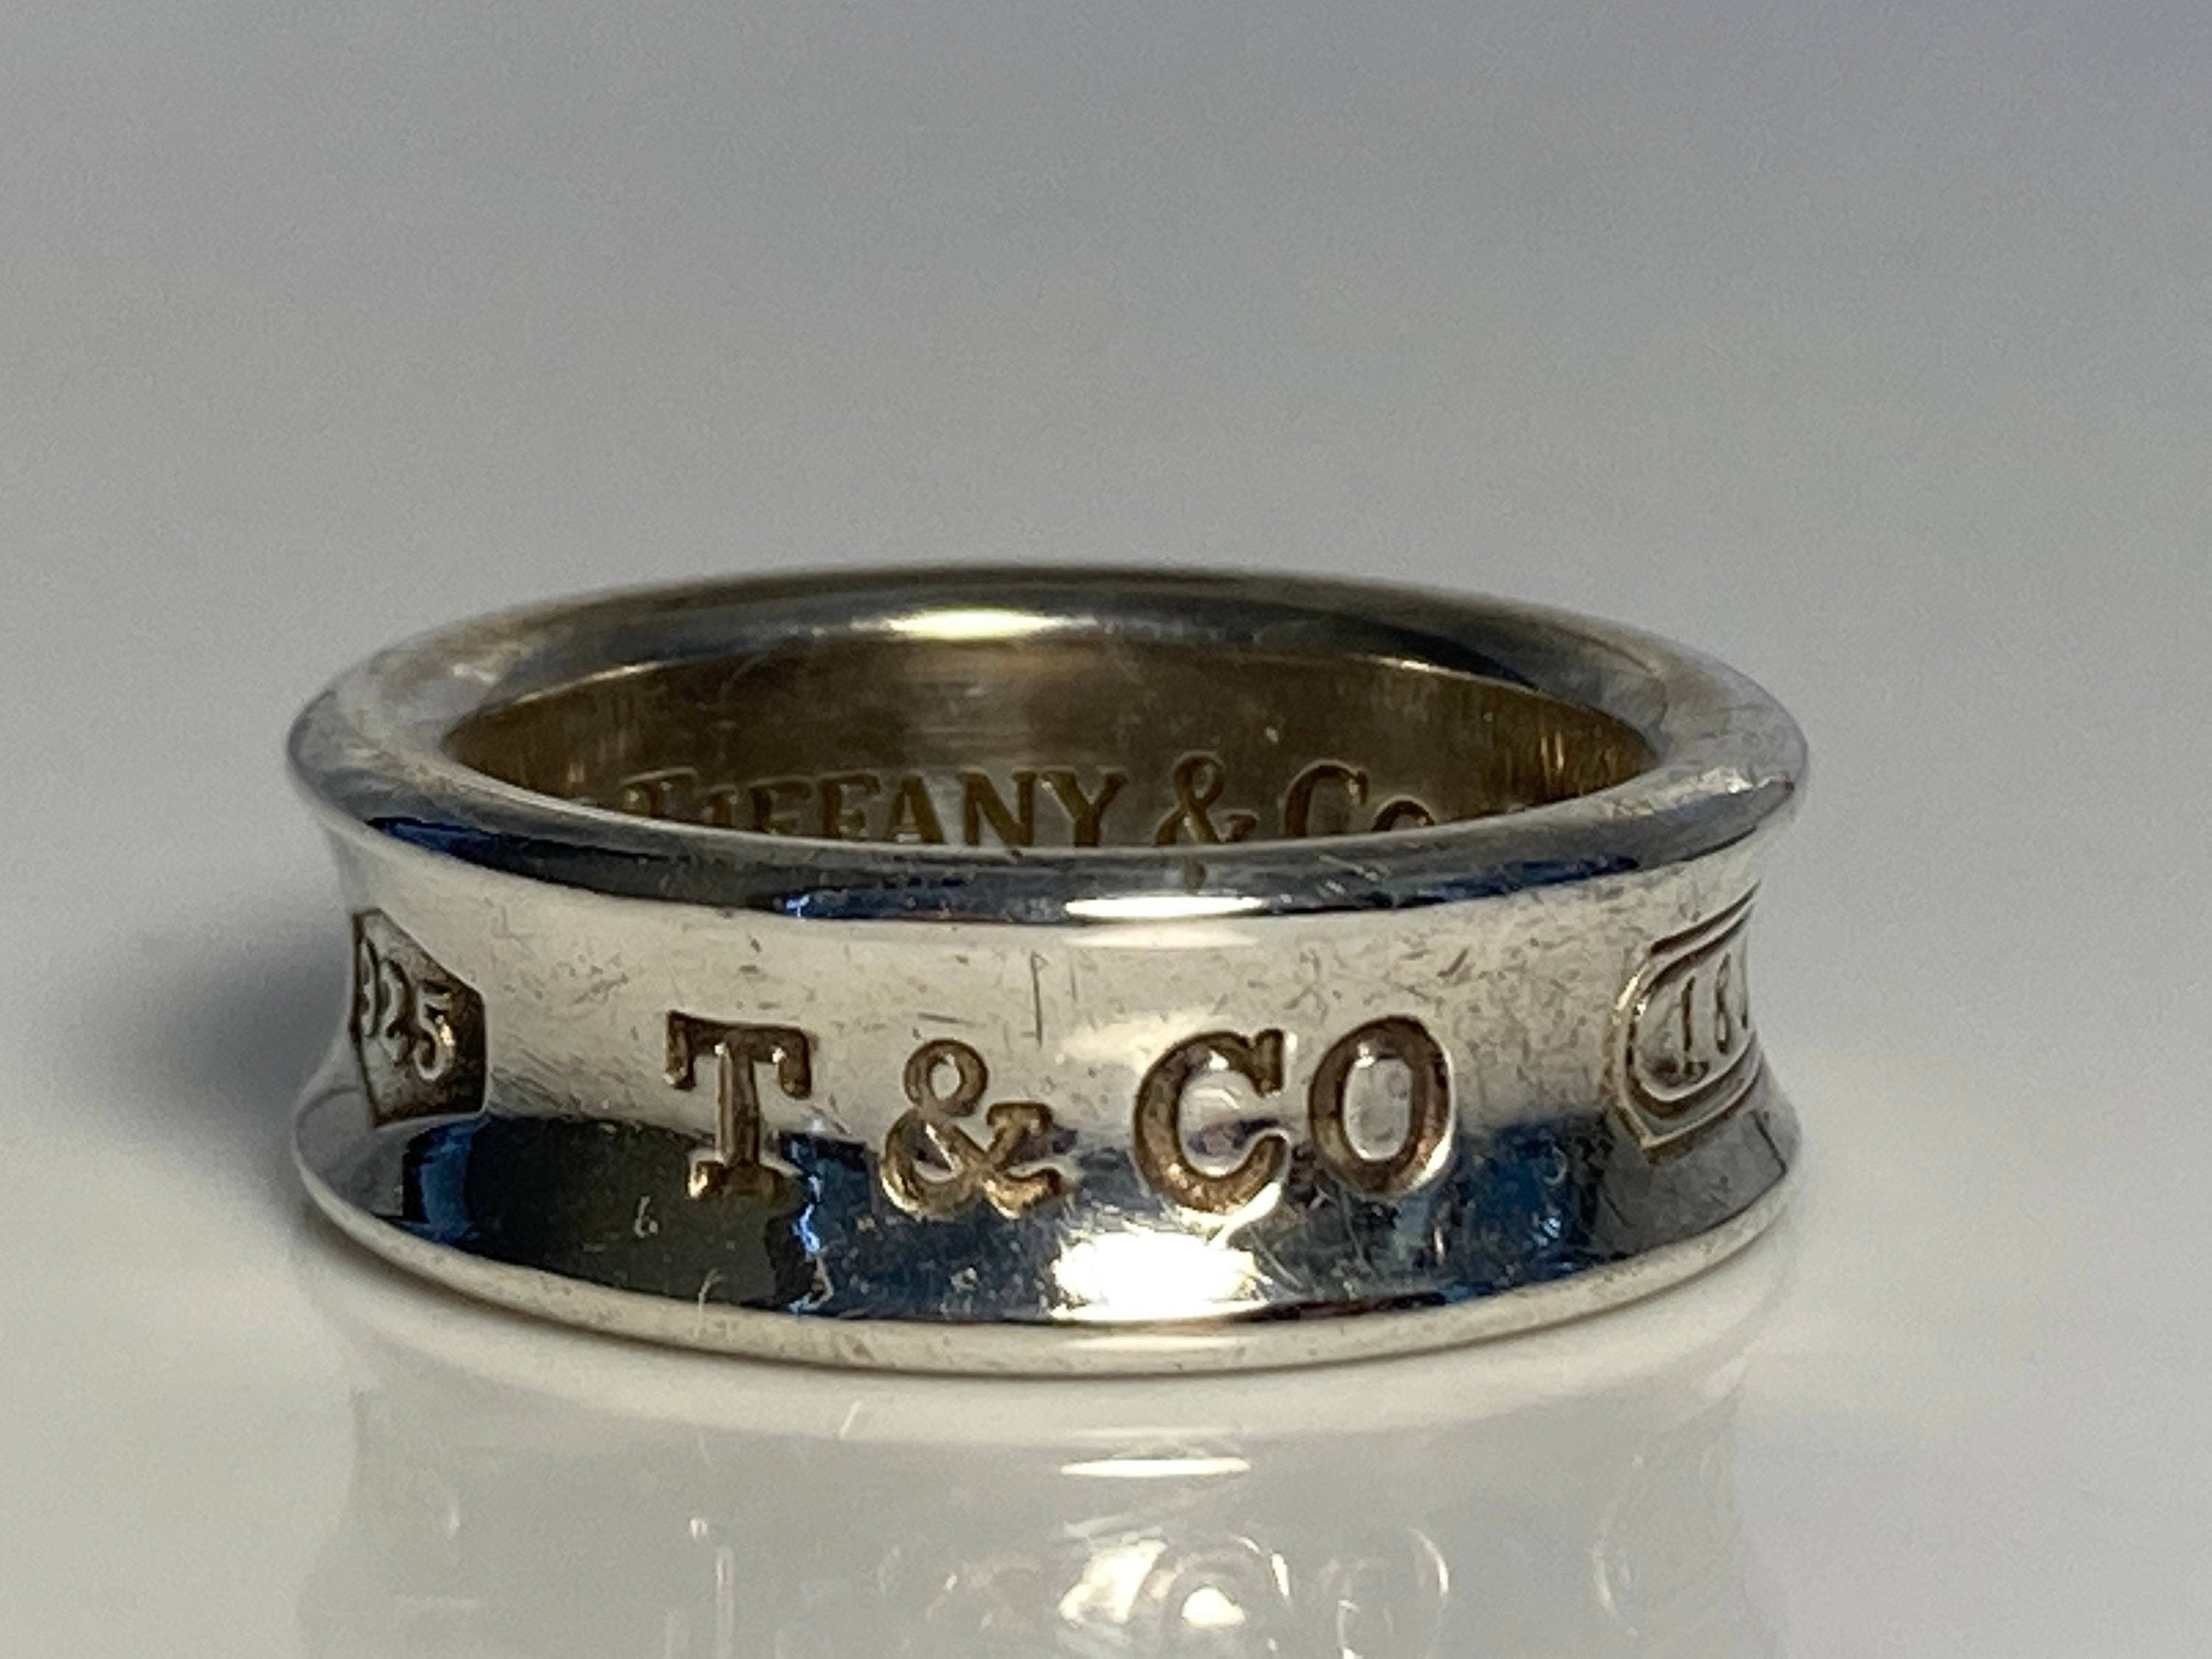 NEW! TIFFANY & CO. Logo 1837 Ring Silver 925 Size US 6 JP 11